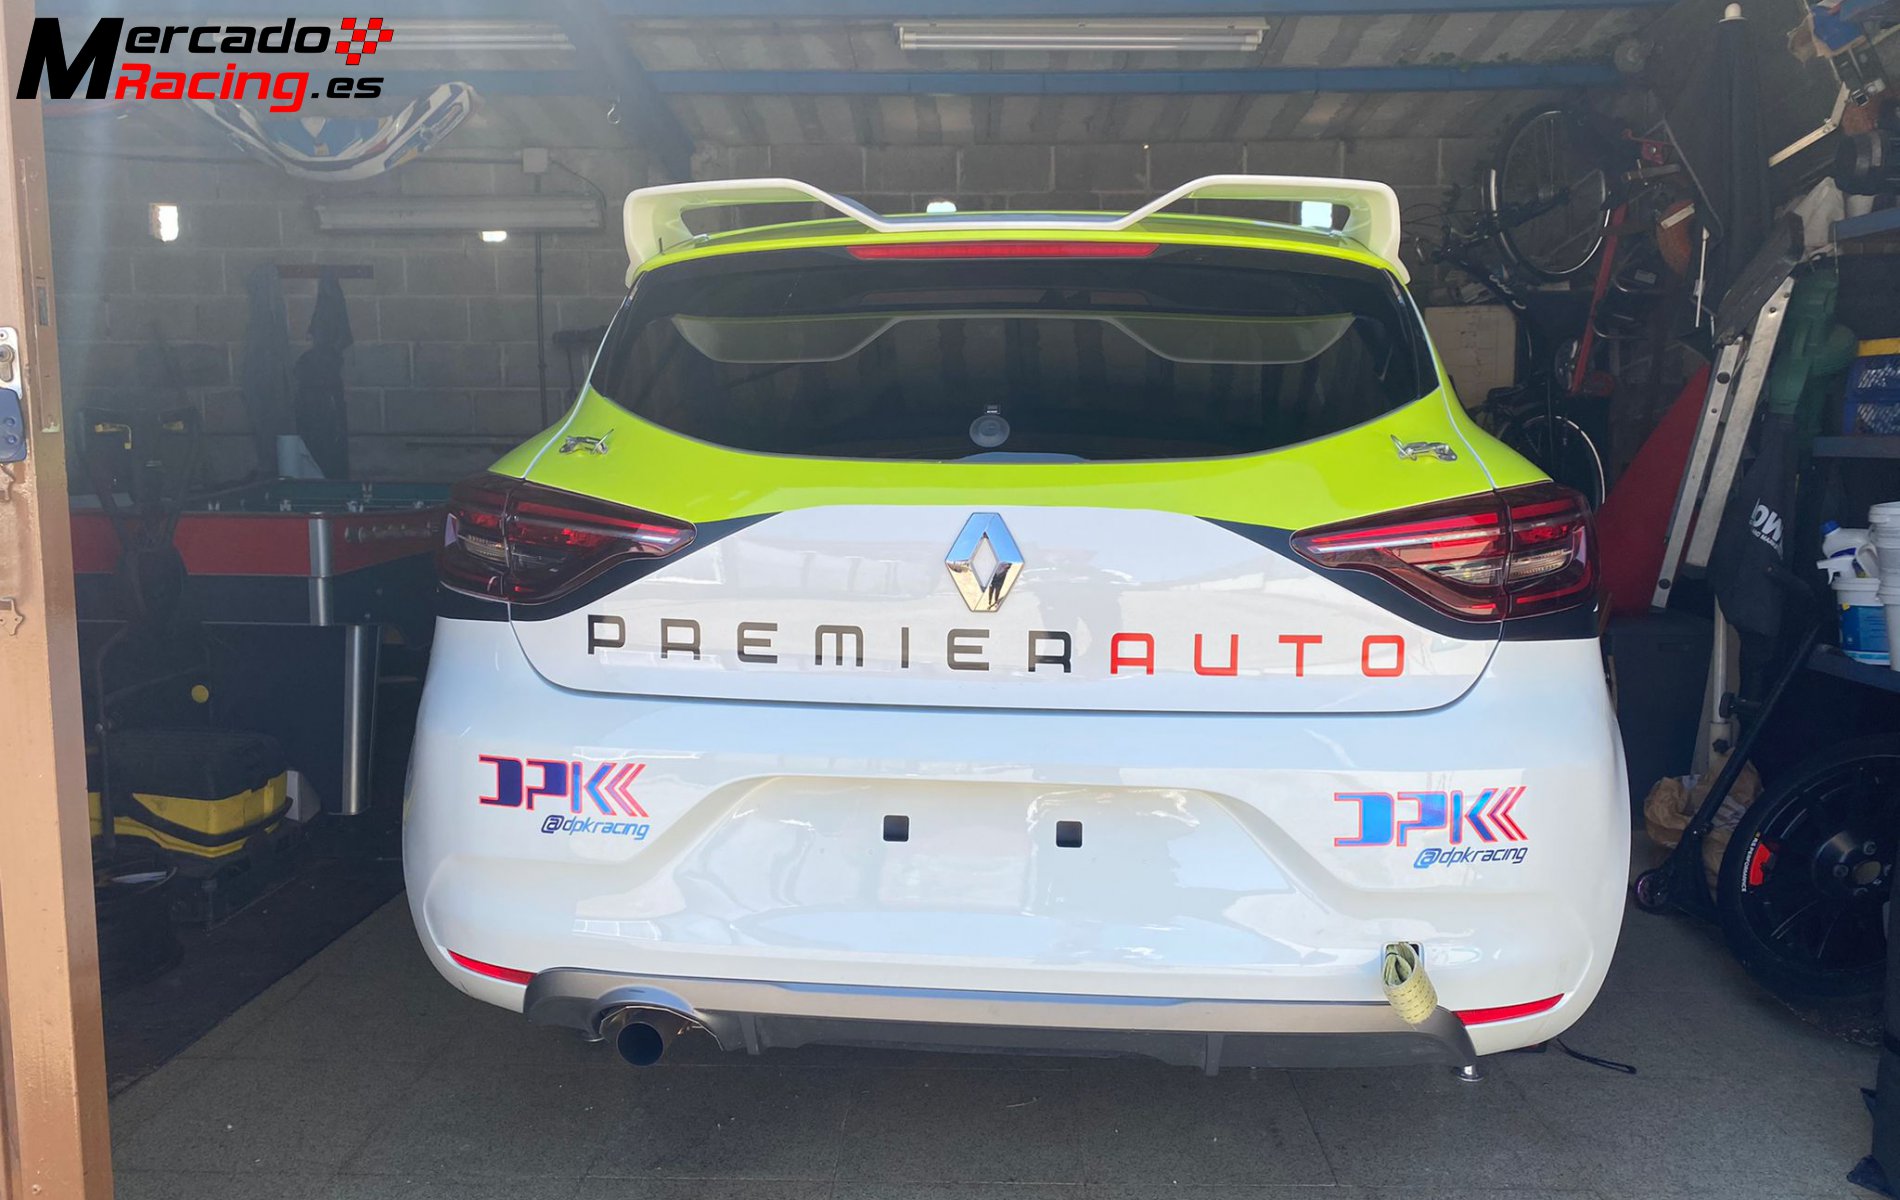 Clio cup 2020